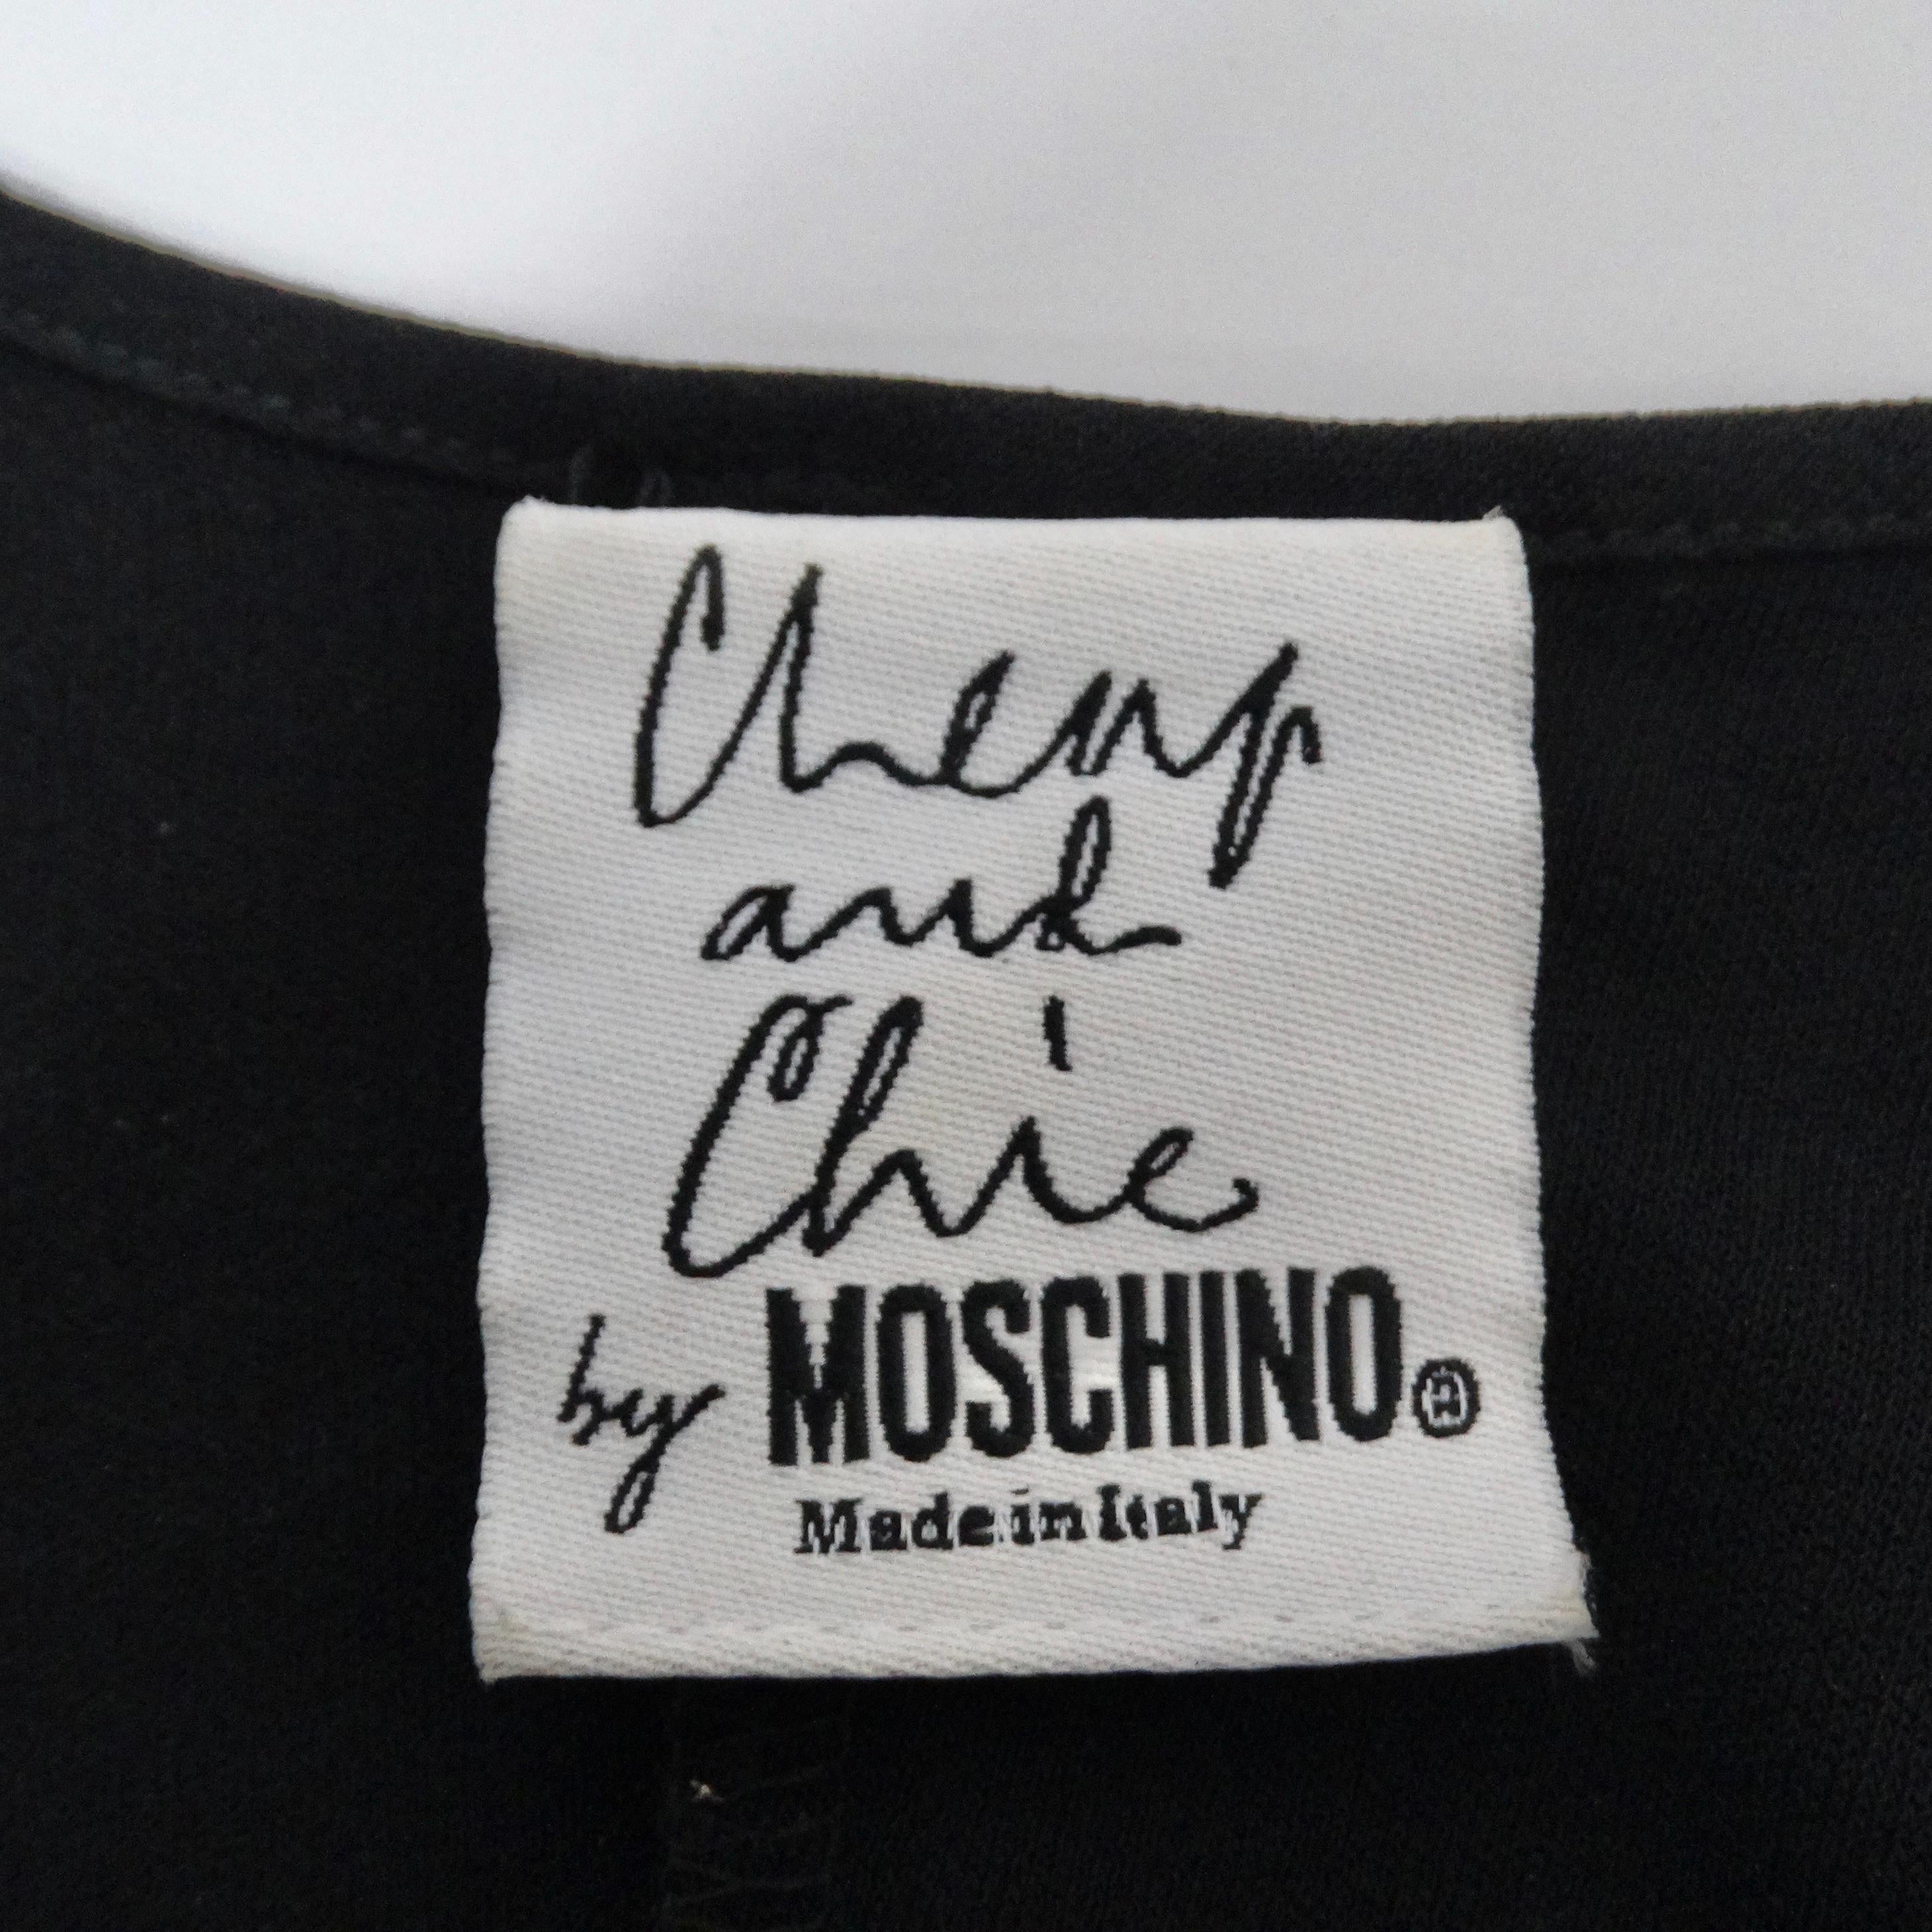 Moschino Cheap And Chic Drawstring Little Black Dress For Sale 7